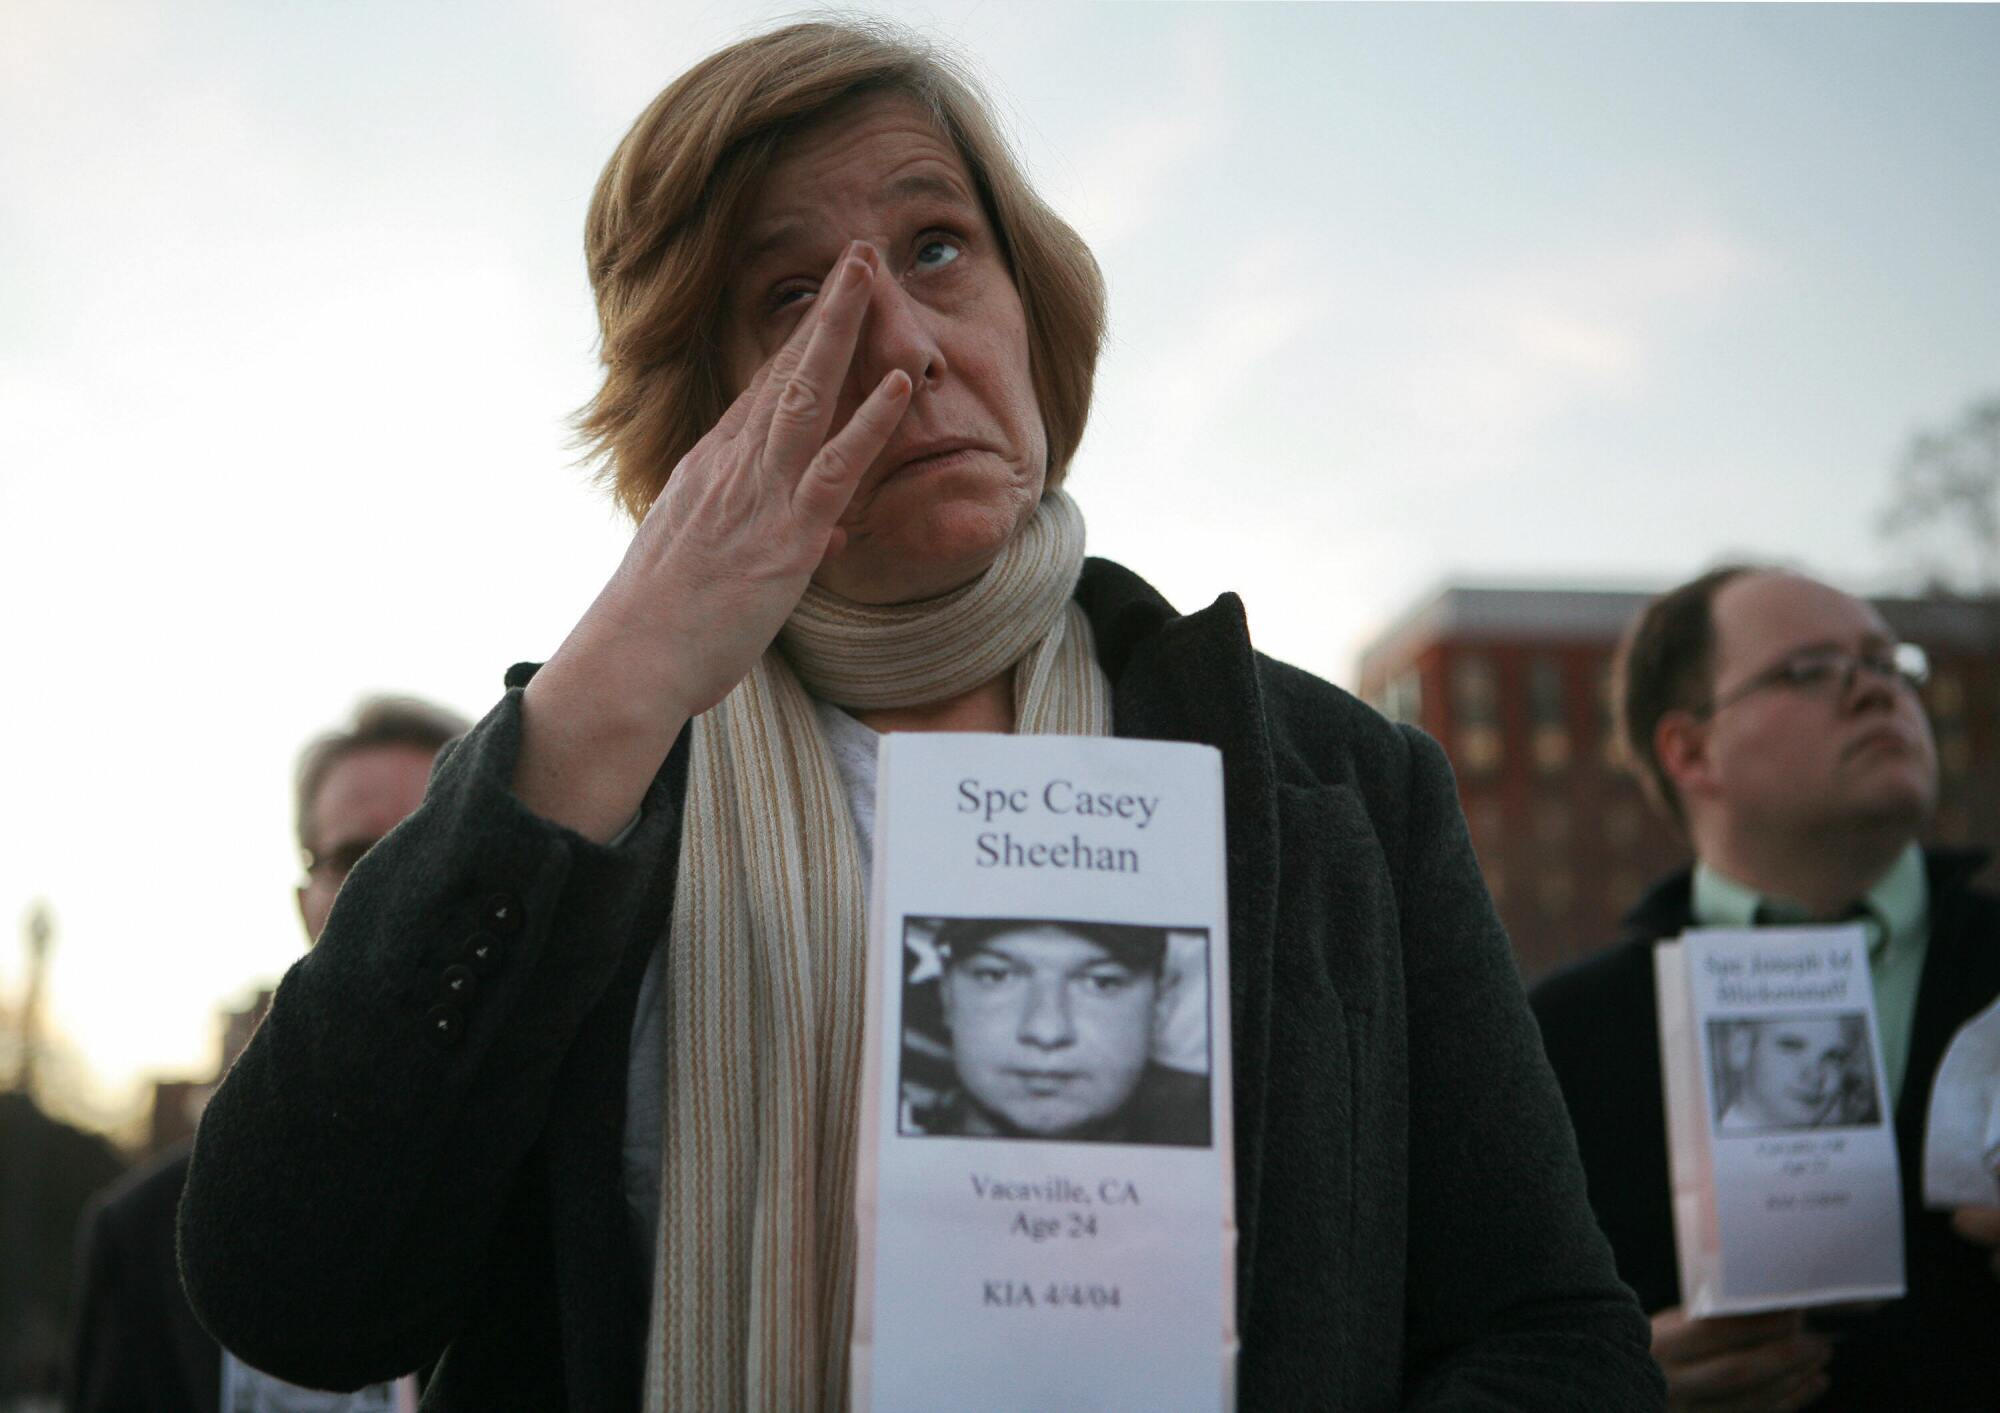 Peace activist Cindy Sheehan holds a picture of her son Casey Sheehan, who was killed in Iraq.